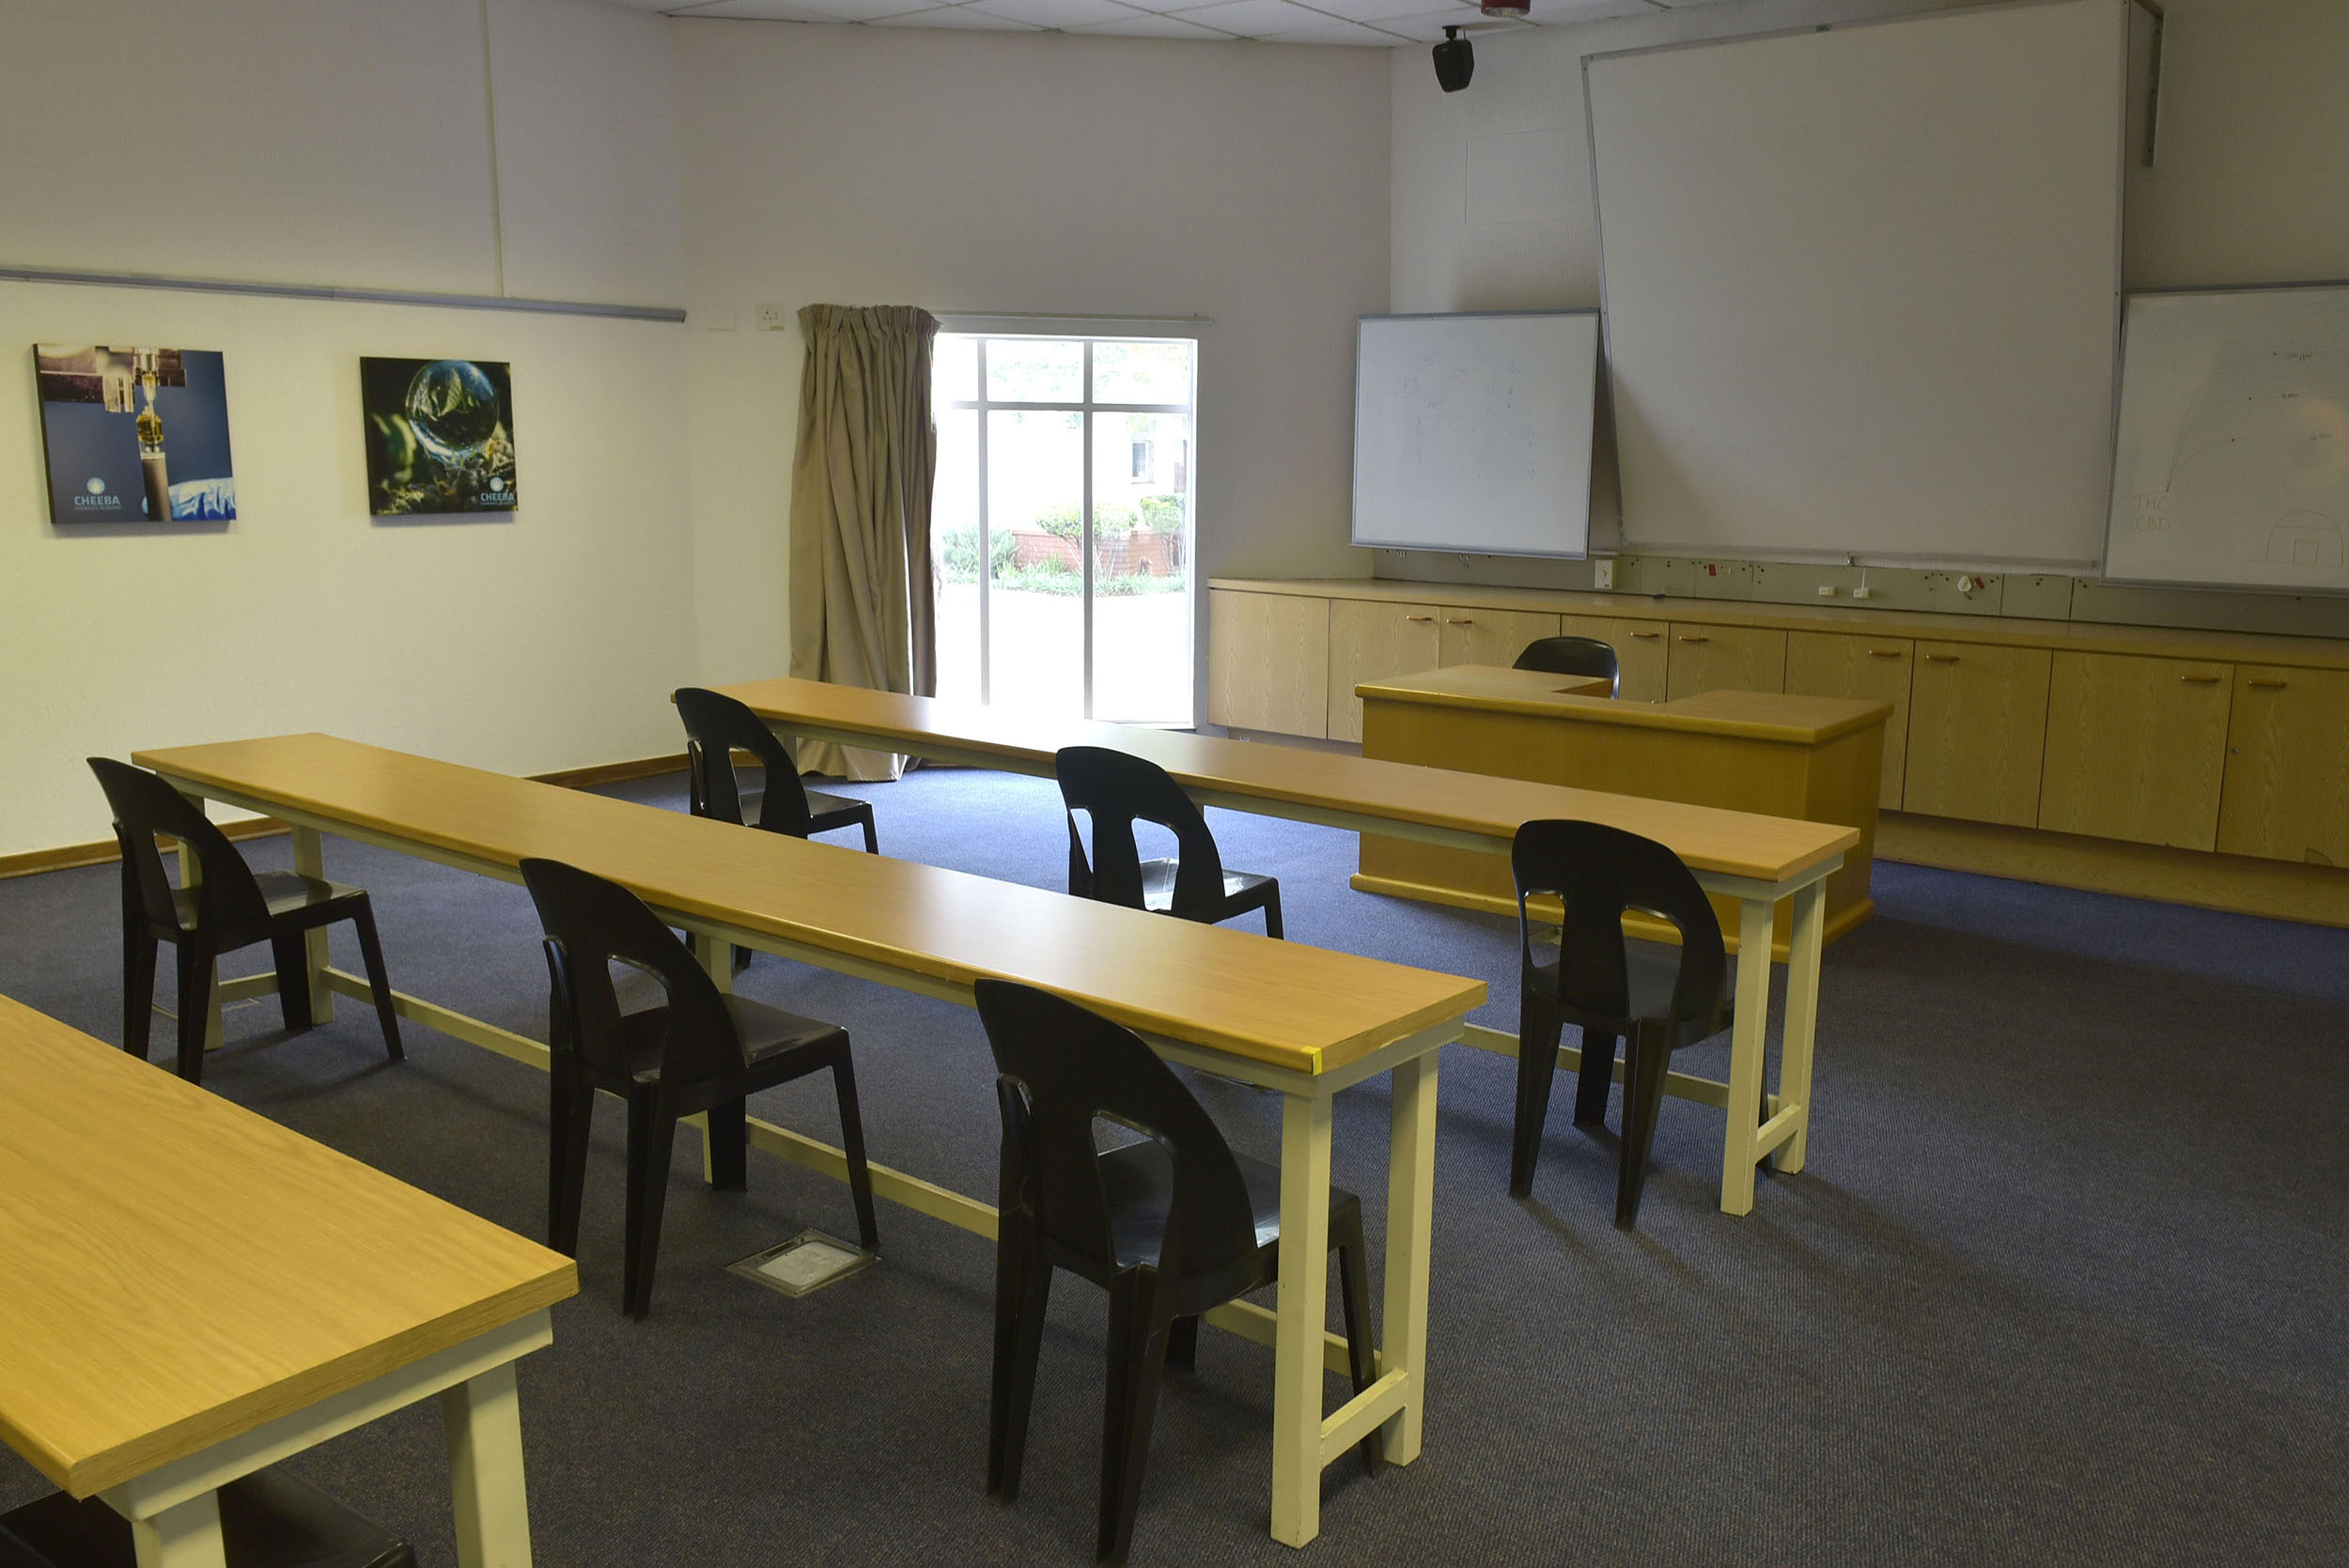 One of the training rooms at the Cheeba Cannabis Academy in Vereeniging. Opening for their first classes soon, Africas first dedicated Cannabis academy aims to deliver an all rounded education in all things cannabis with the aim to equip people with the knowledge needed as the Cannabis industry grows in South Africa and worldwide. Picture: Neil McCartney